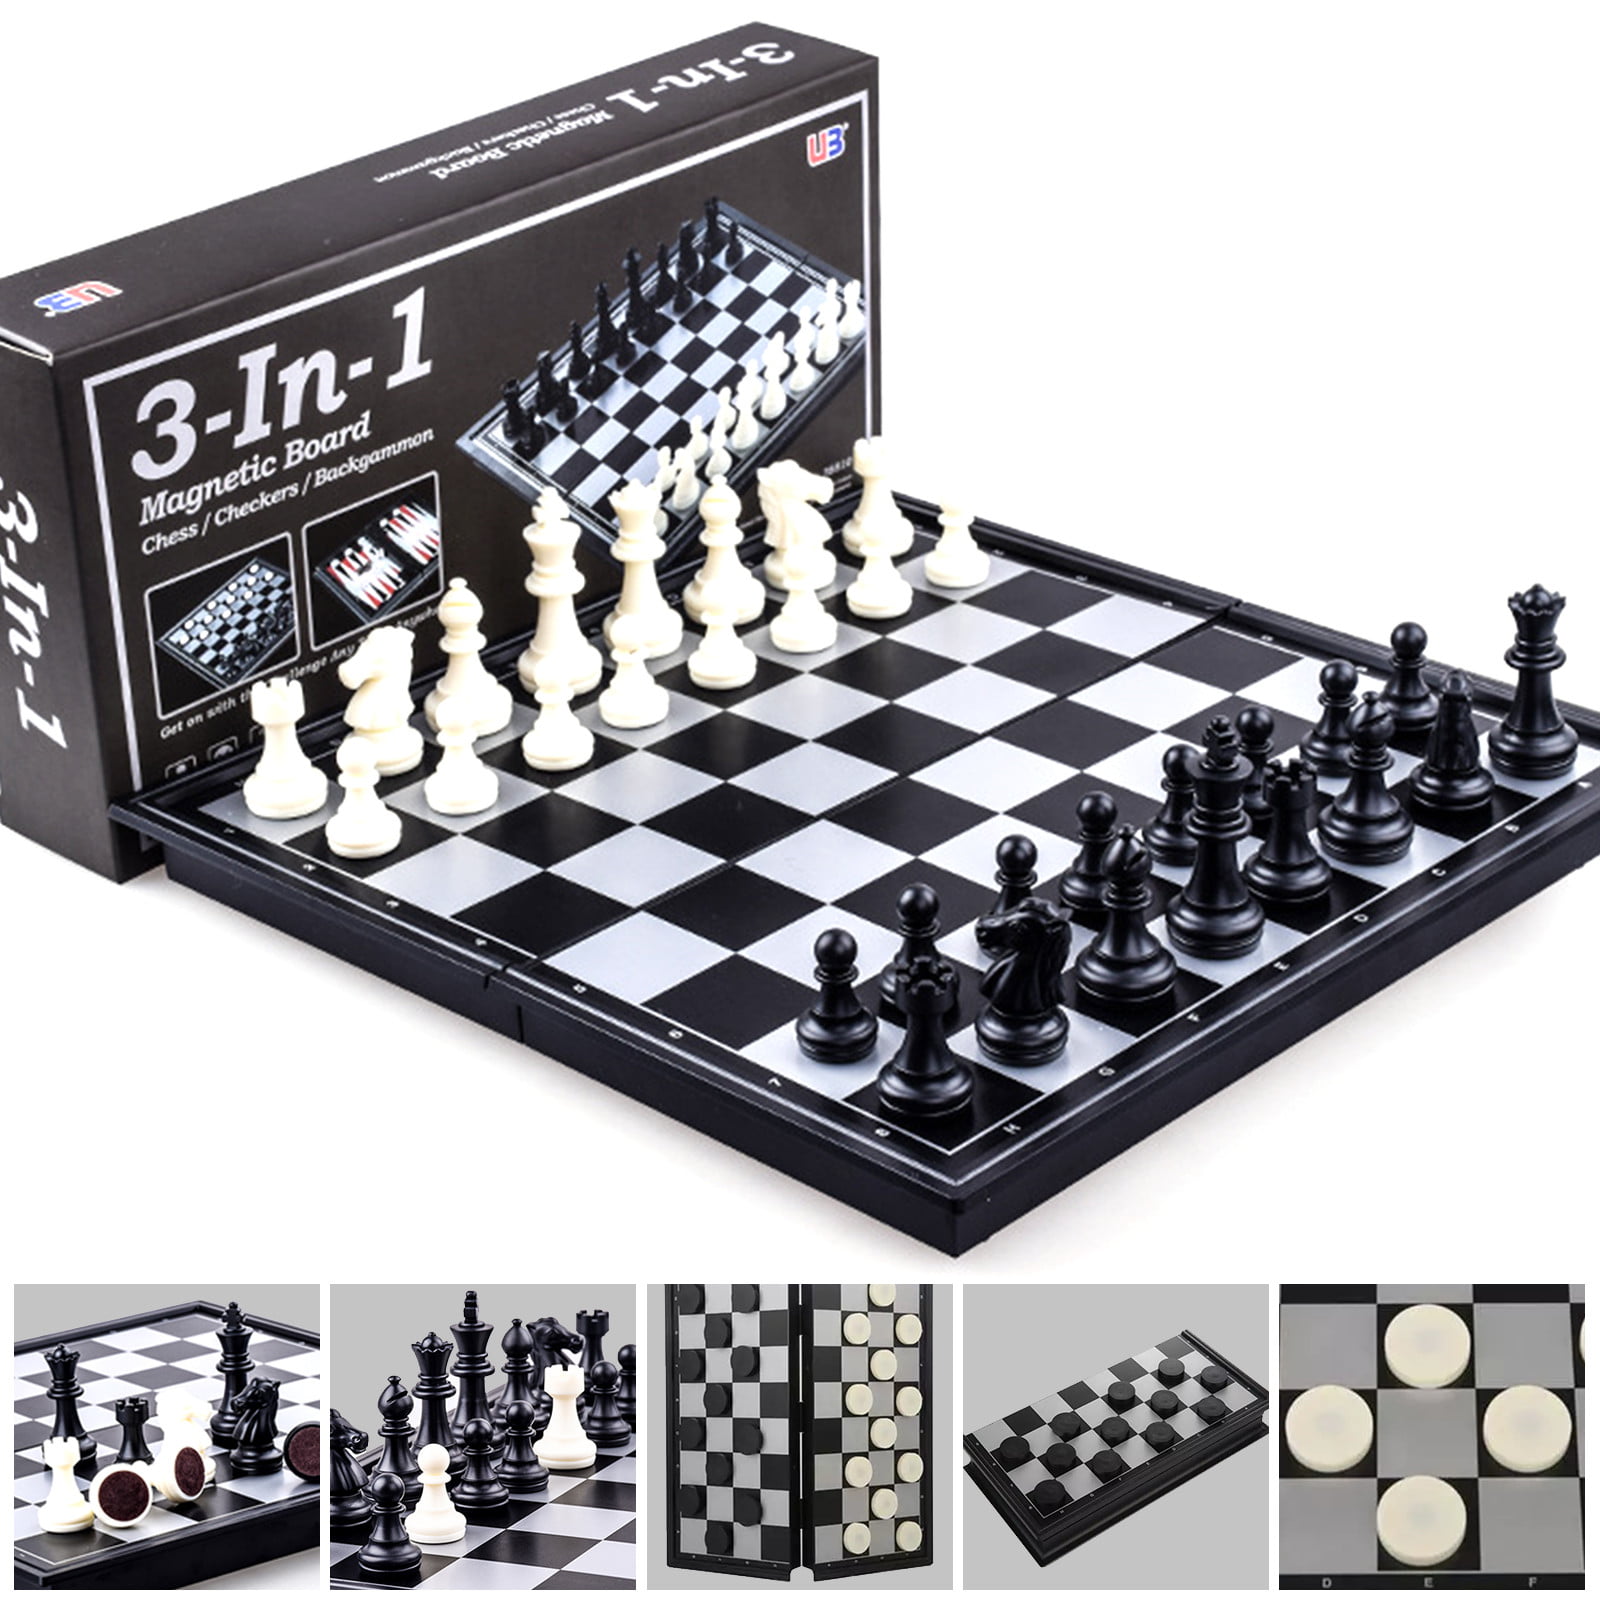 NEW Magnetic Folding Chess Board Game Set/High quality Chess size 32 x 32 cm 